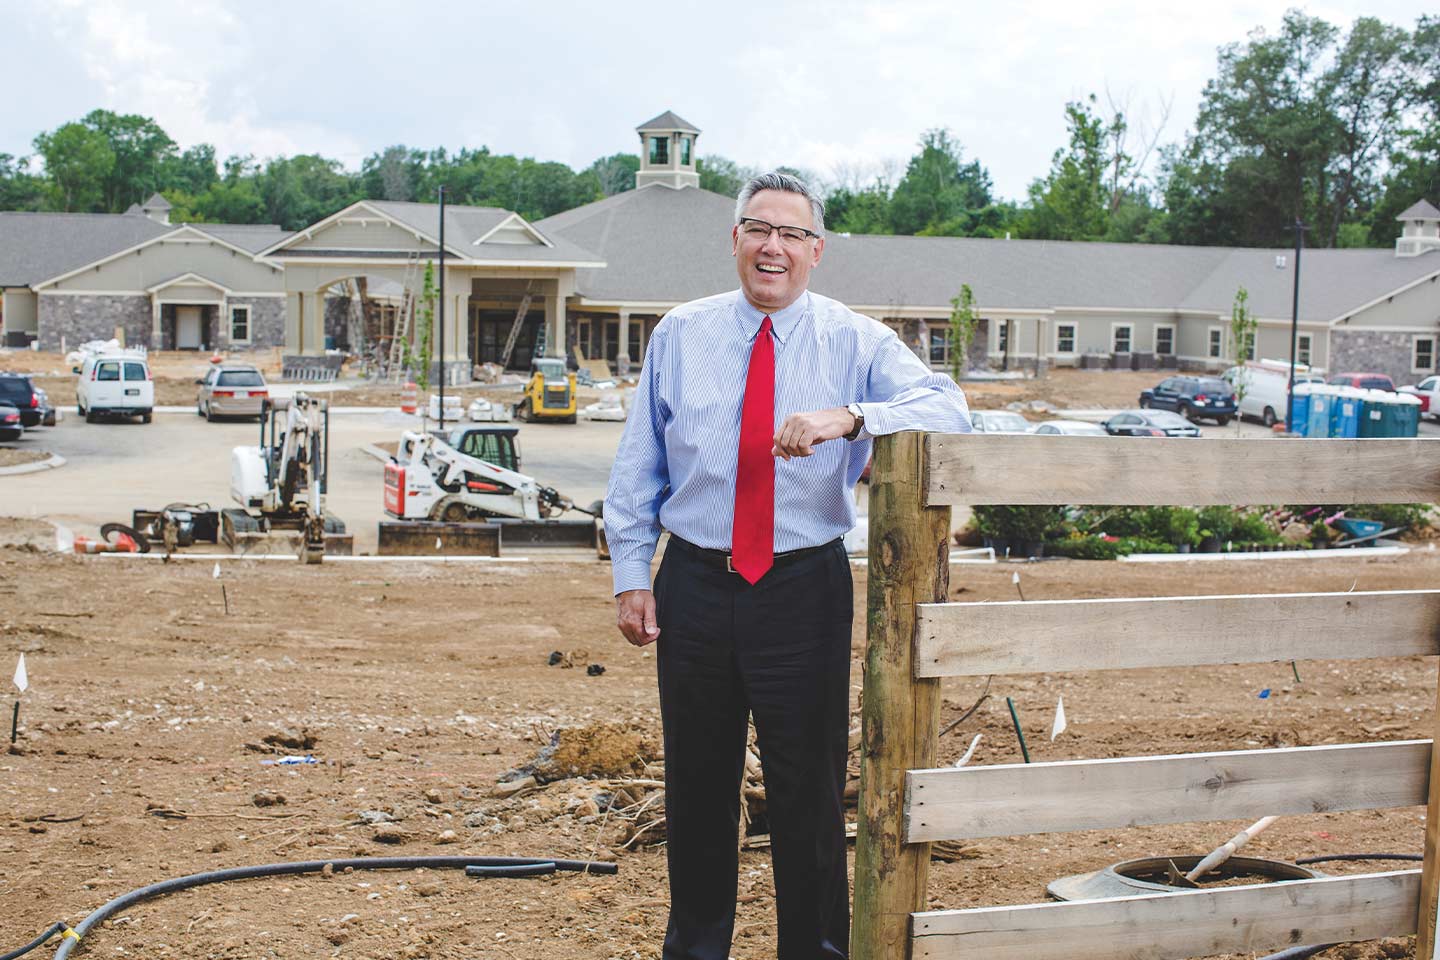 greg a. vital of morning pointe senior living in east hamilton location in chattanooga